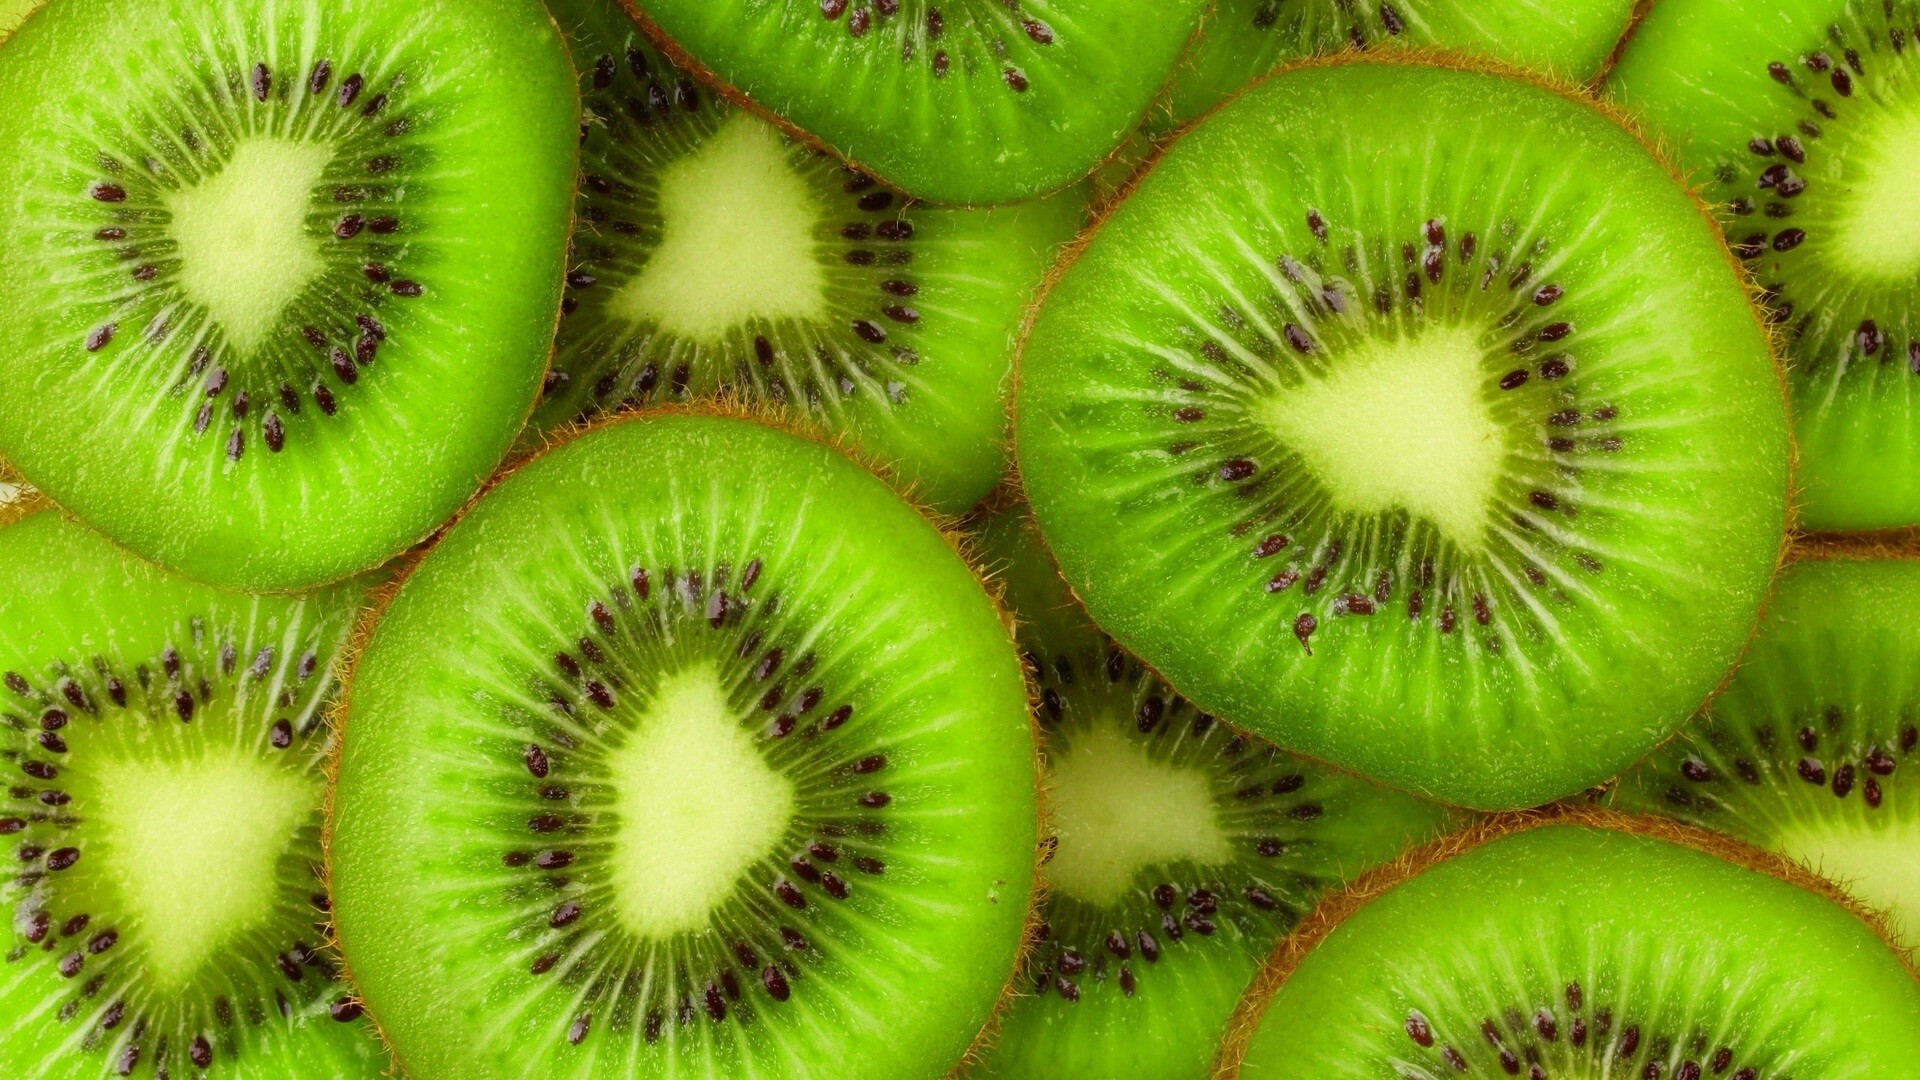 Fruit: Kiwi, Native to the mountains and hillsides of Southwest China. 1920x1080 Full HD Wallpaper.